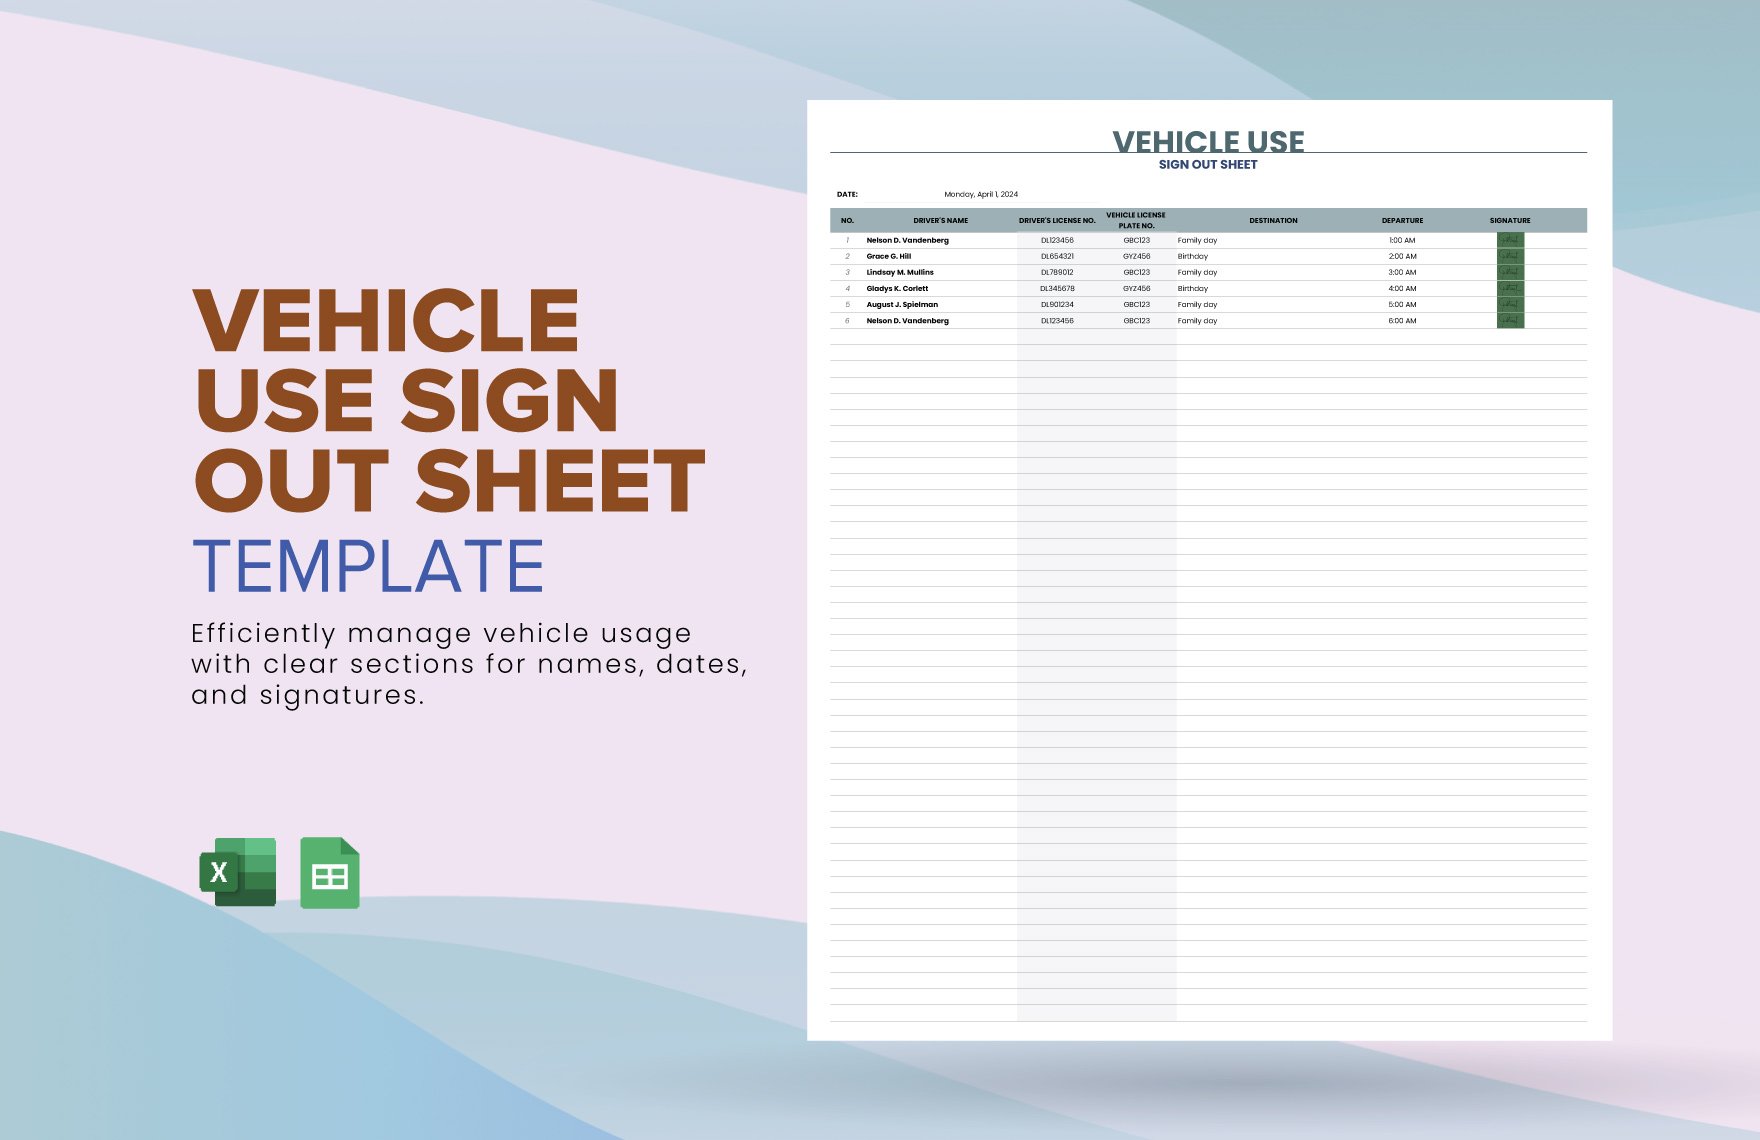 Vehicle Use Sign Out Sheet Template in Excel, Google Sheets